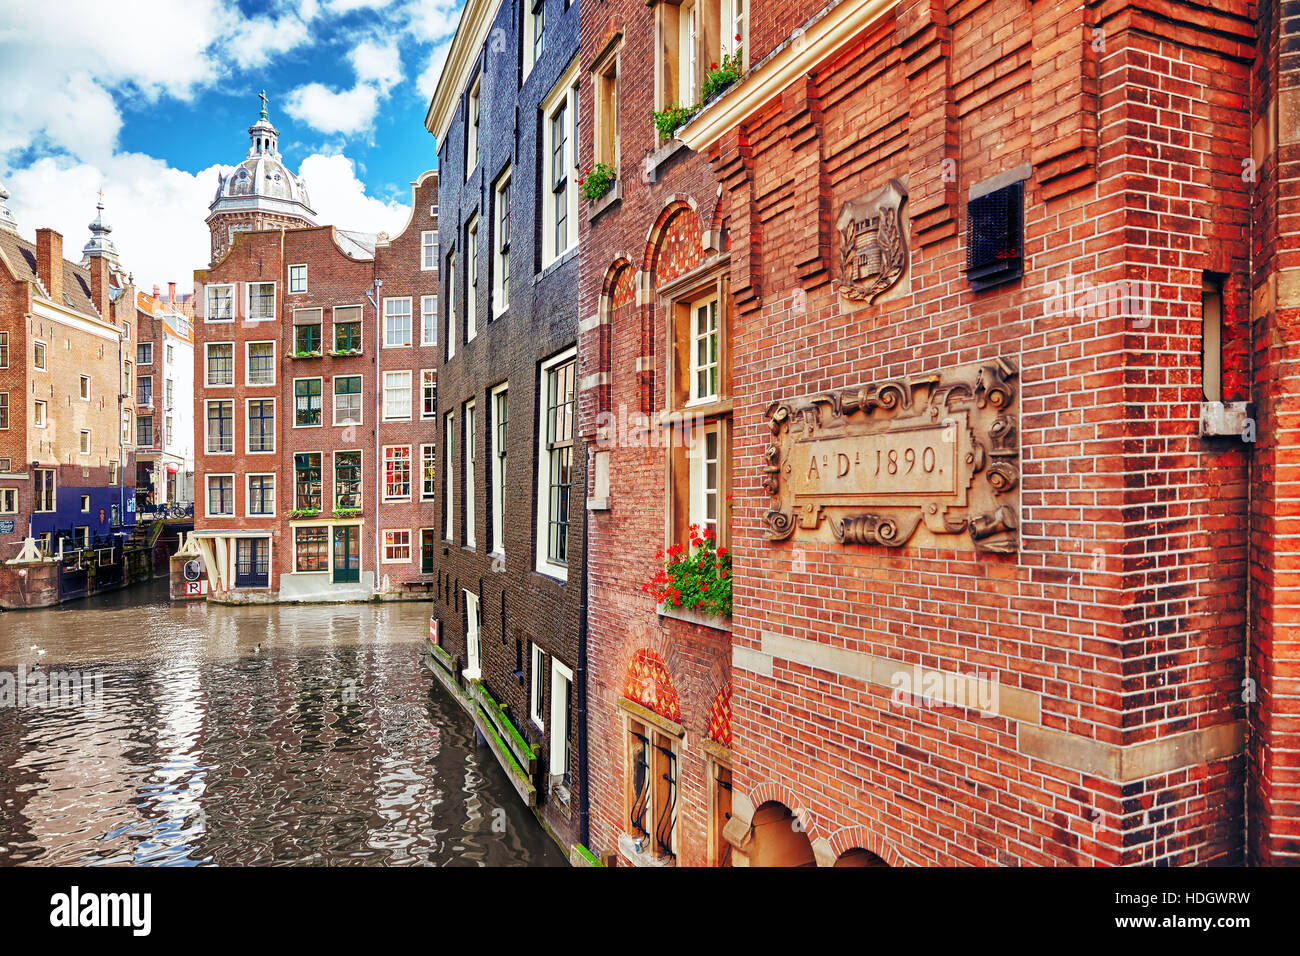 Beautiful views of the streets, ancient buildings, people, embankments of Amsterdam - also call 'Venice in the North'. Netherland Stock Photo